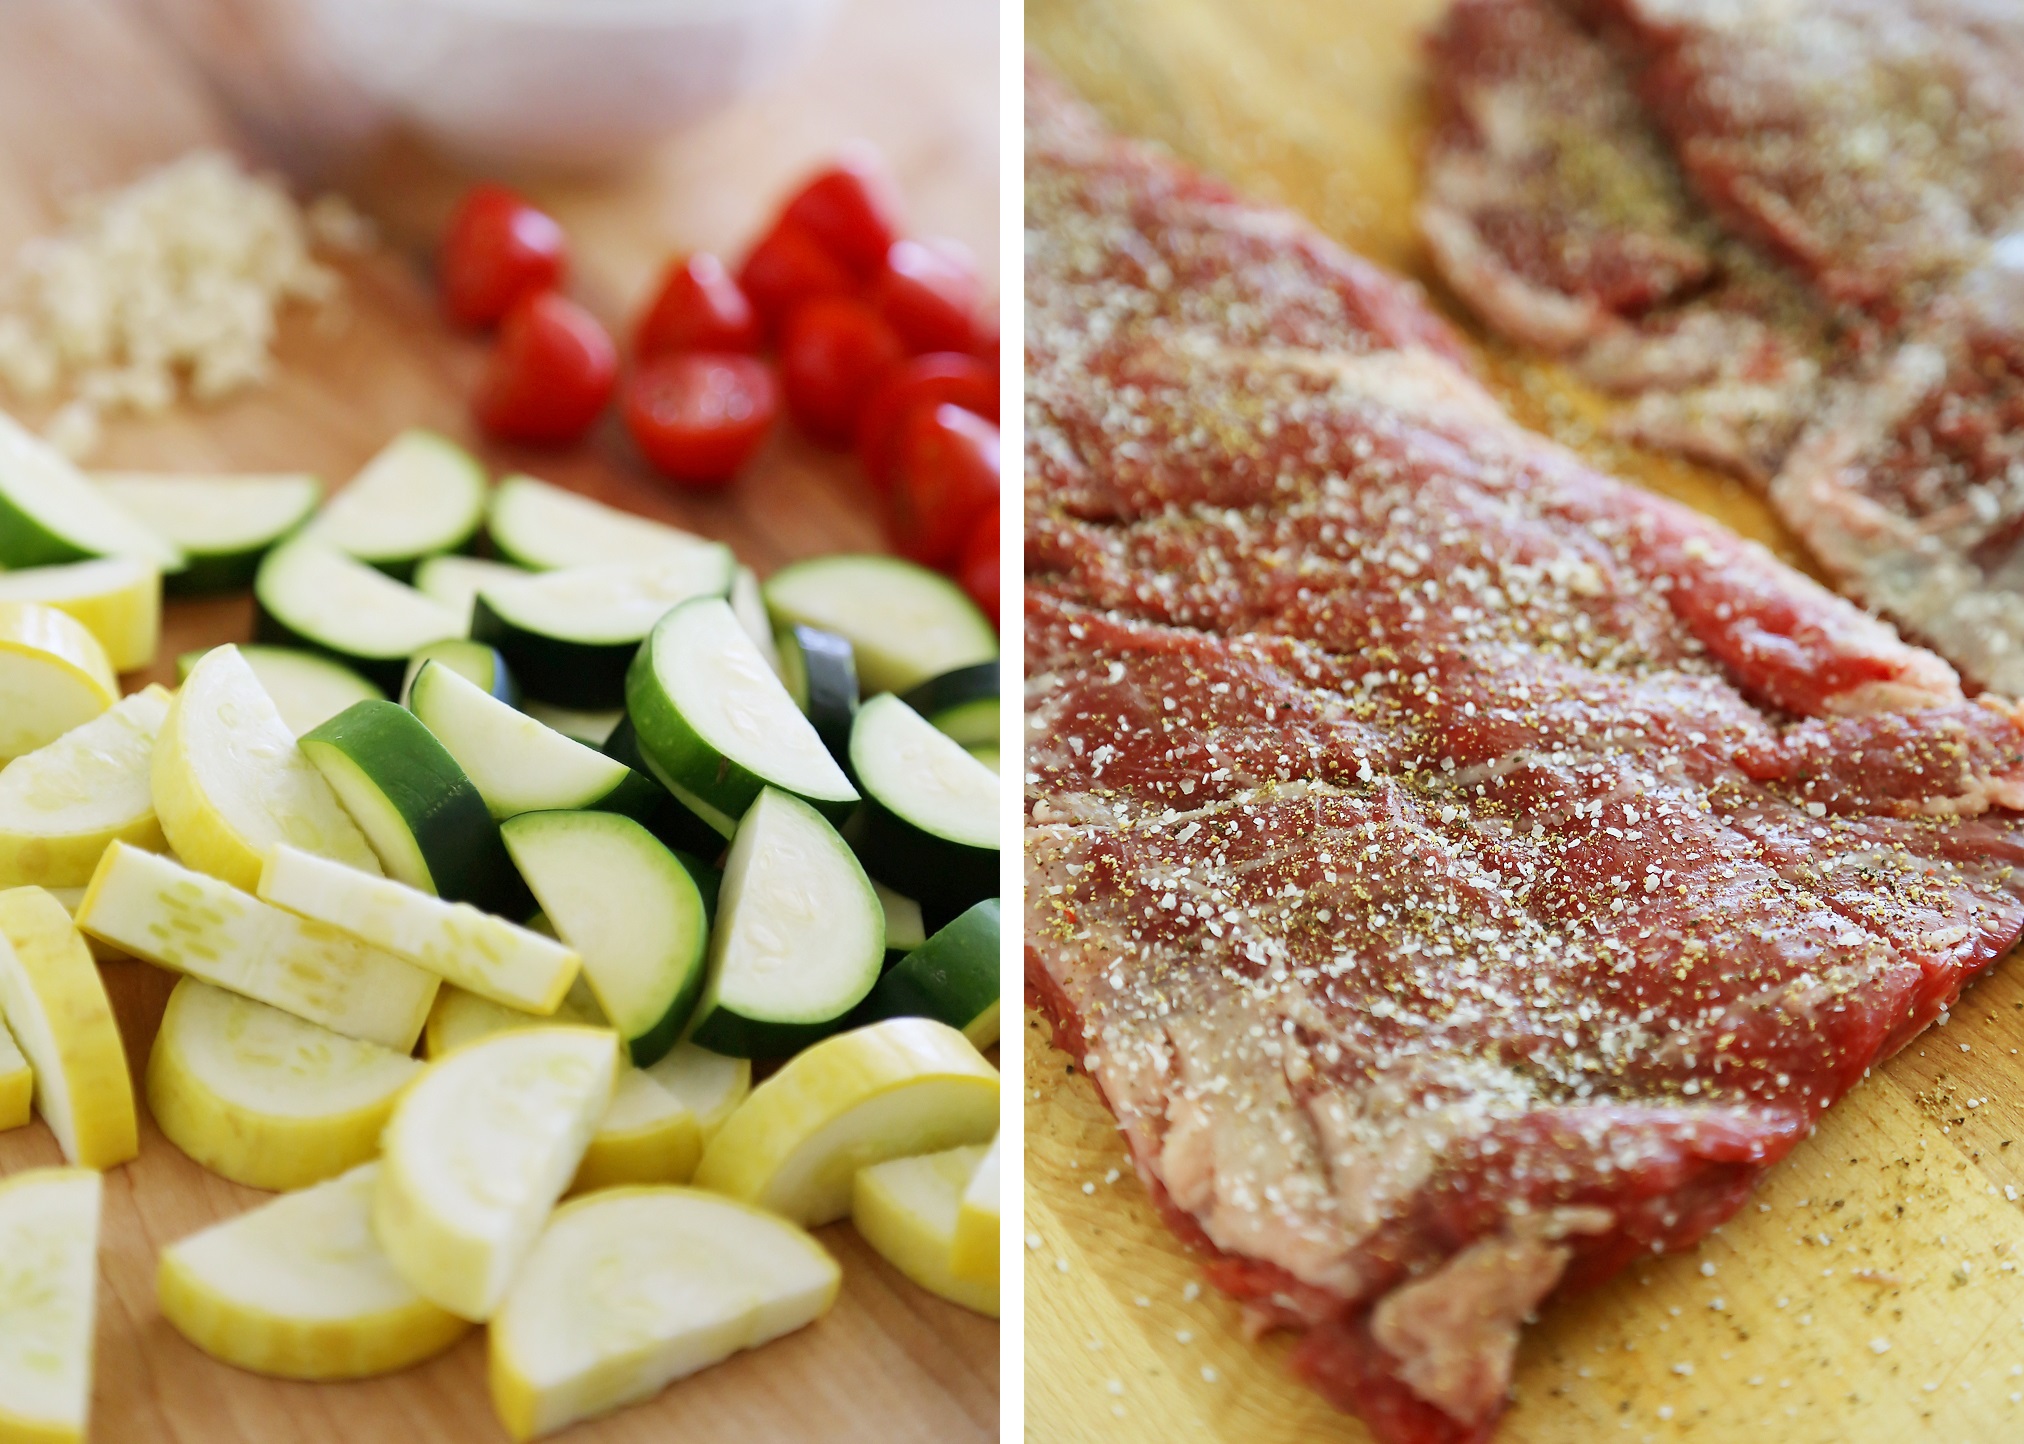 Skillet Balsamic Skirt Steak with Garlic Zucchini, Squash and Tomatoes - Melt-in-your-mouth tangy, tender steak dinner with veggies, easily made in one skillet! Thecomfortofcooking.com